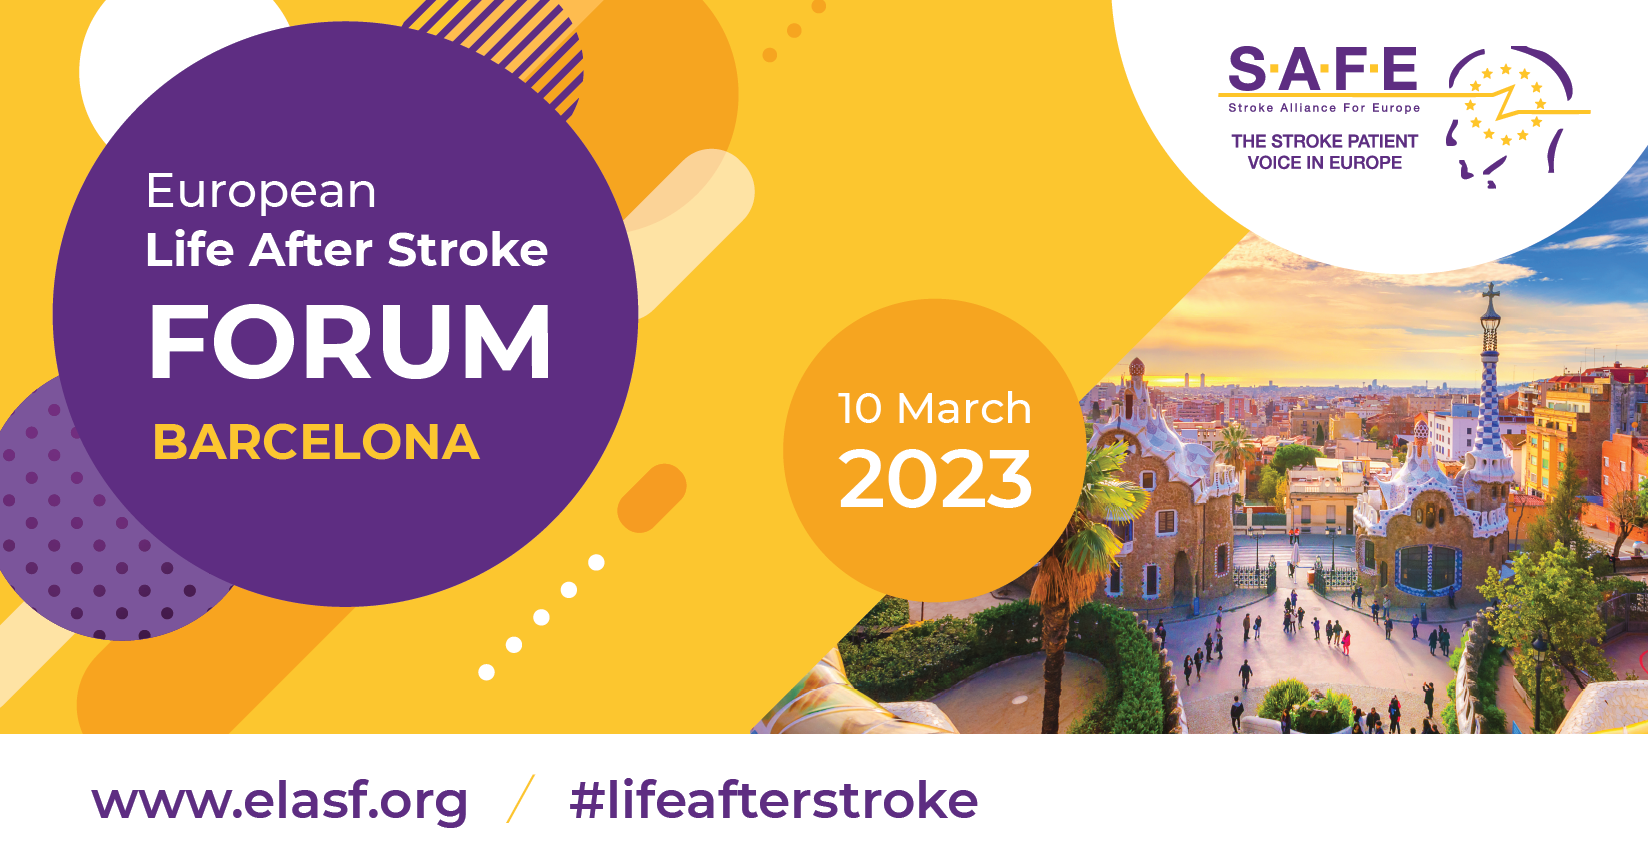 Join us at our European Life After Stroke Forum, 10 March 2023 in Barcelona